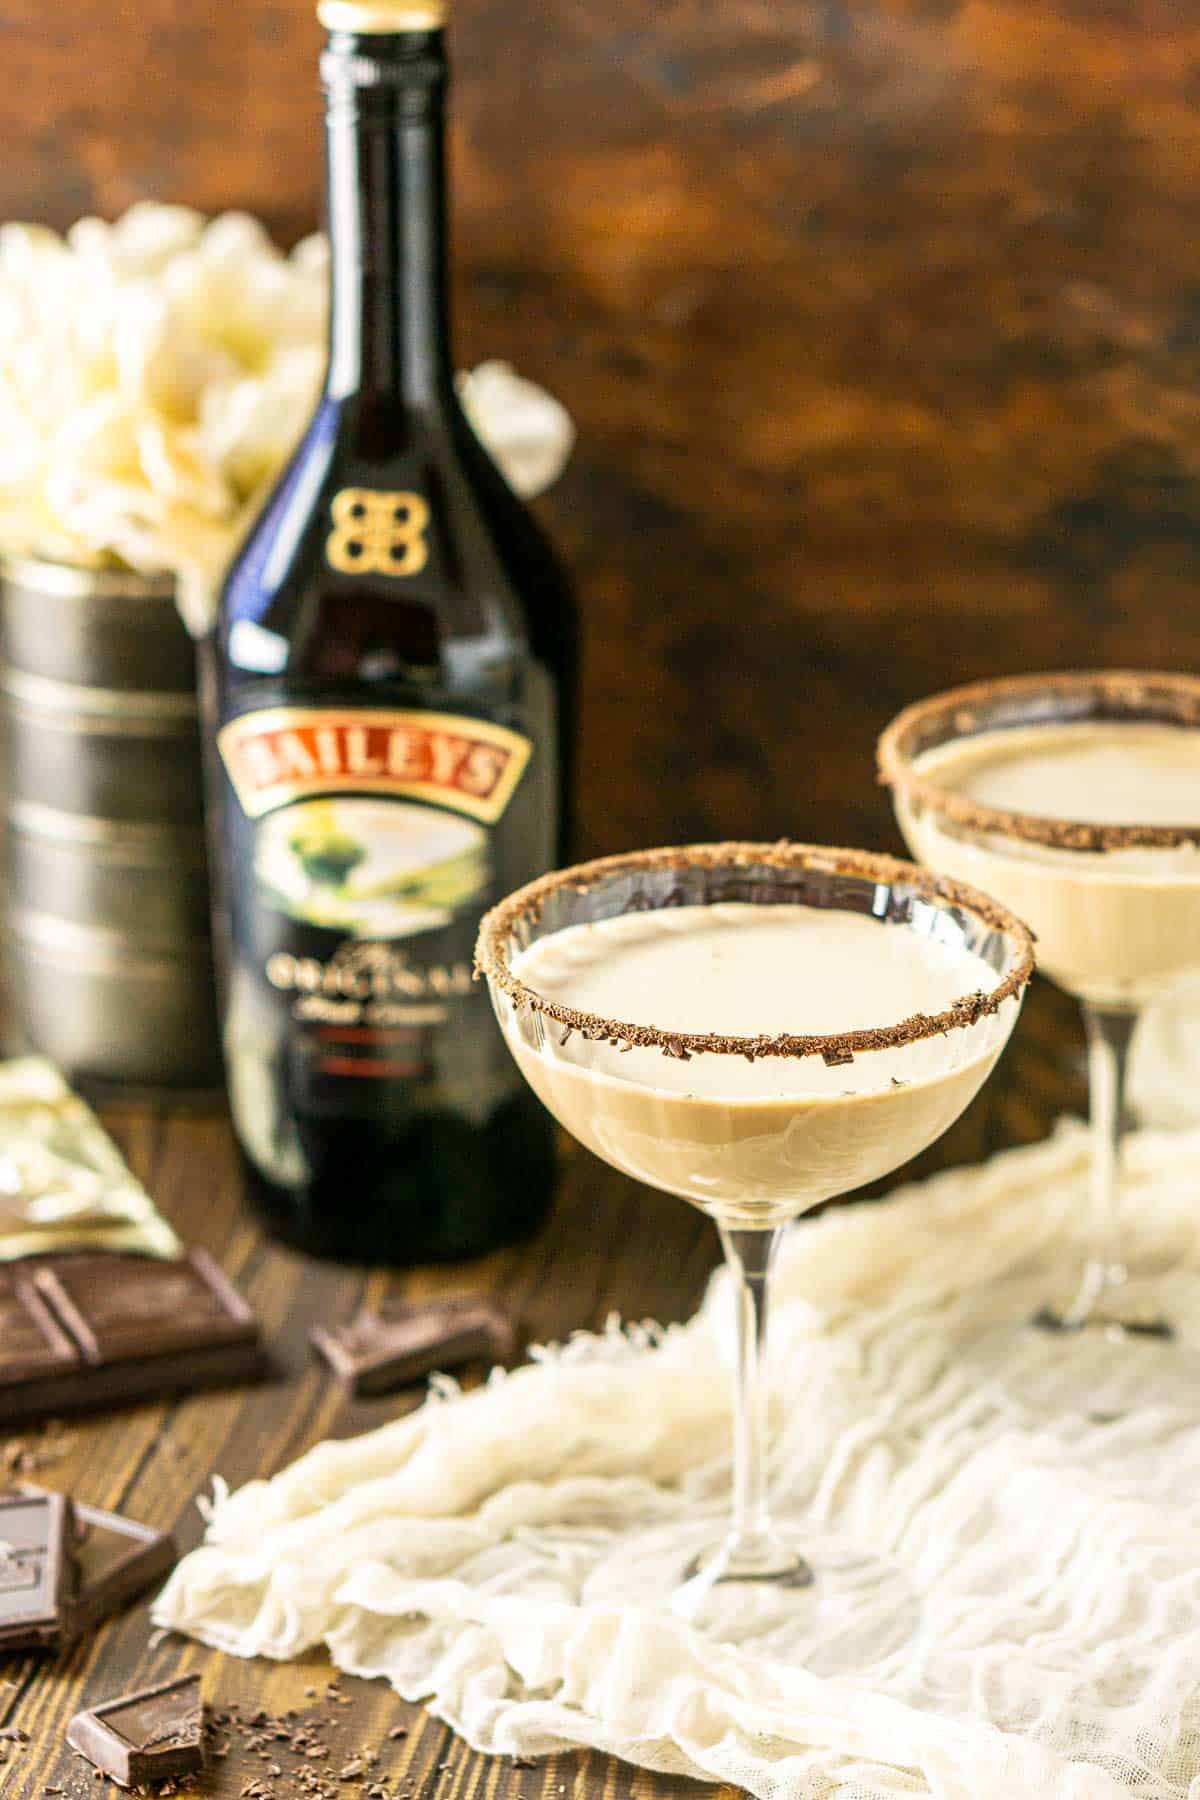 Two Baileys chocolate martinis with flowers and Irish cream behind them.